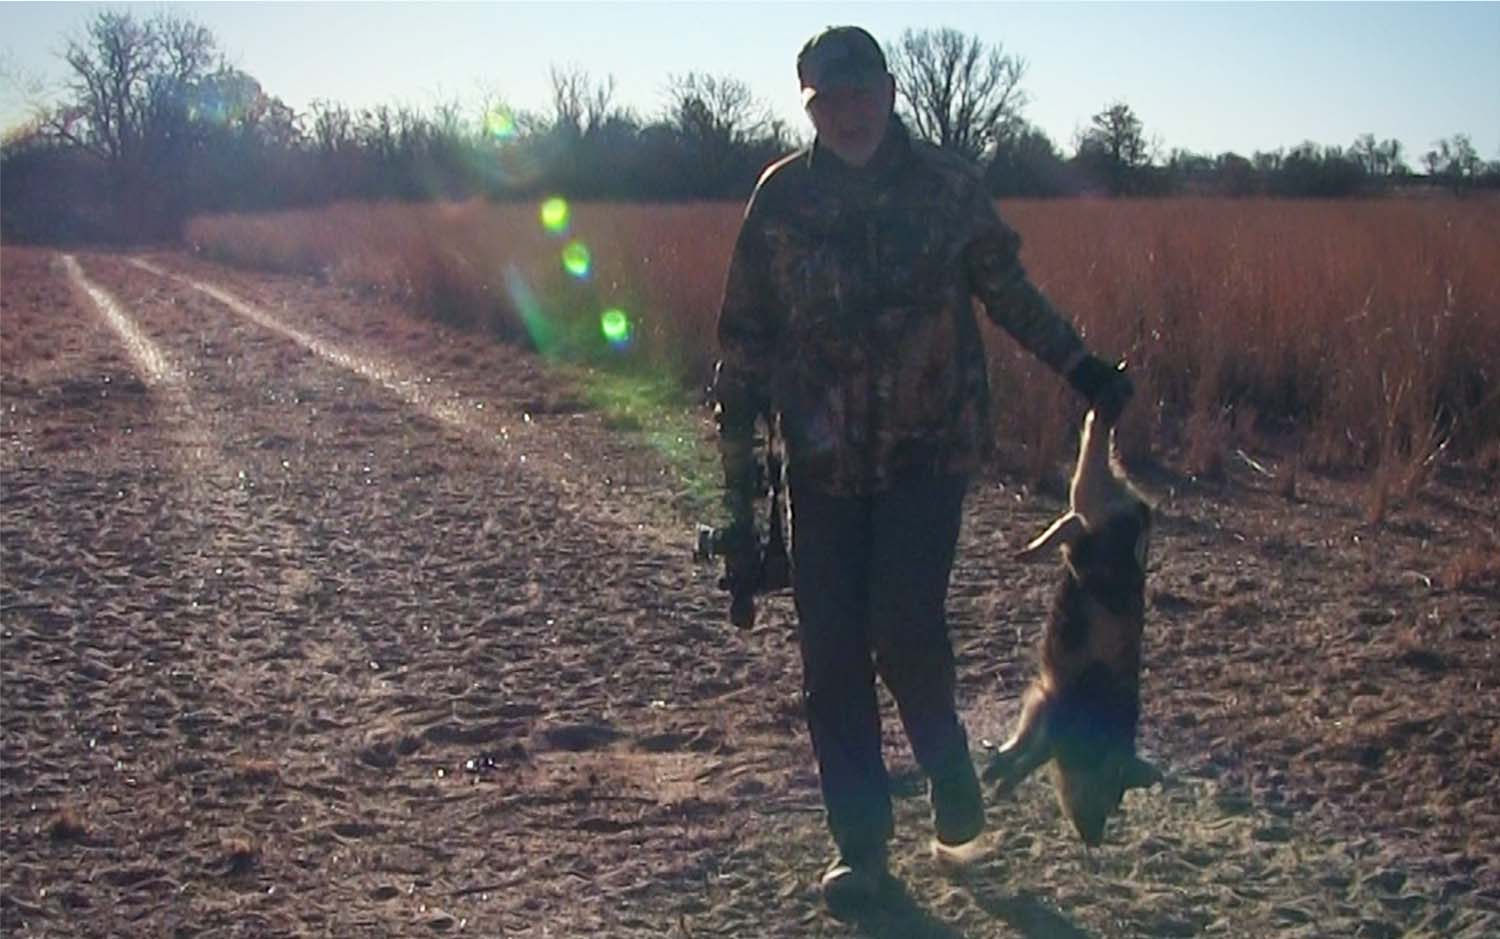 A man in the field carrying a hog he shot